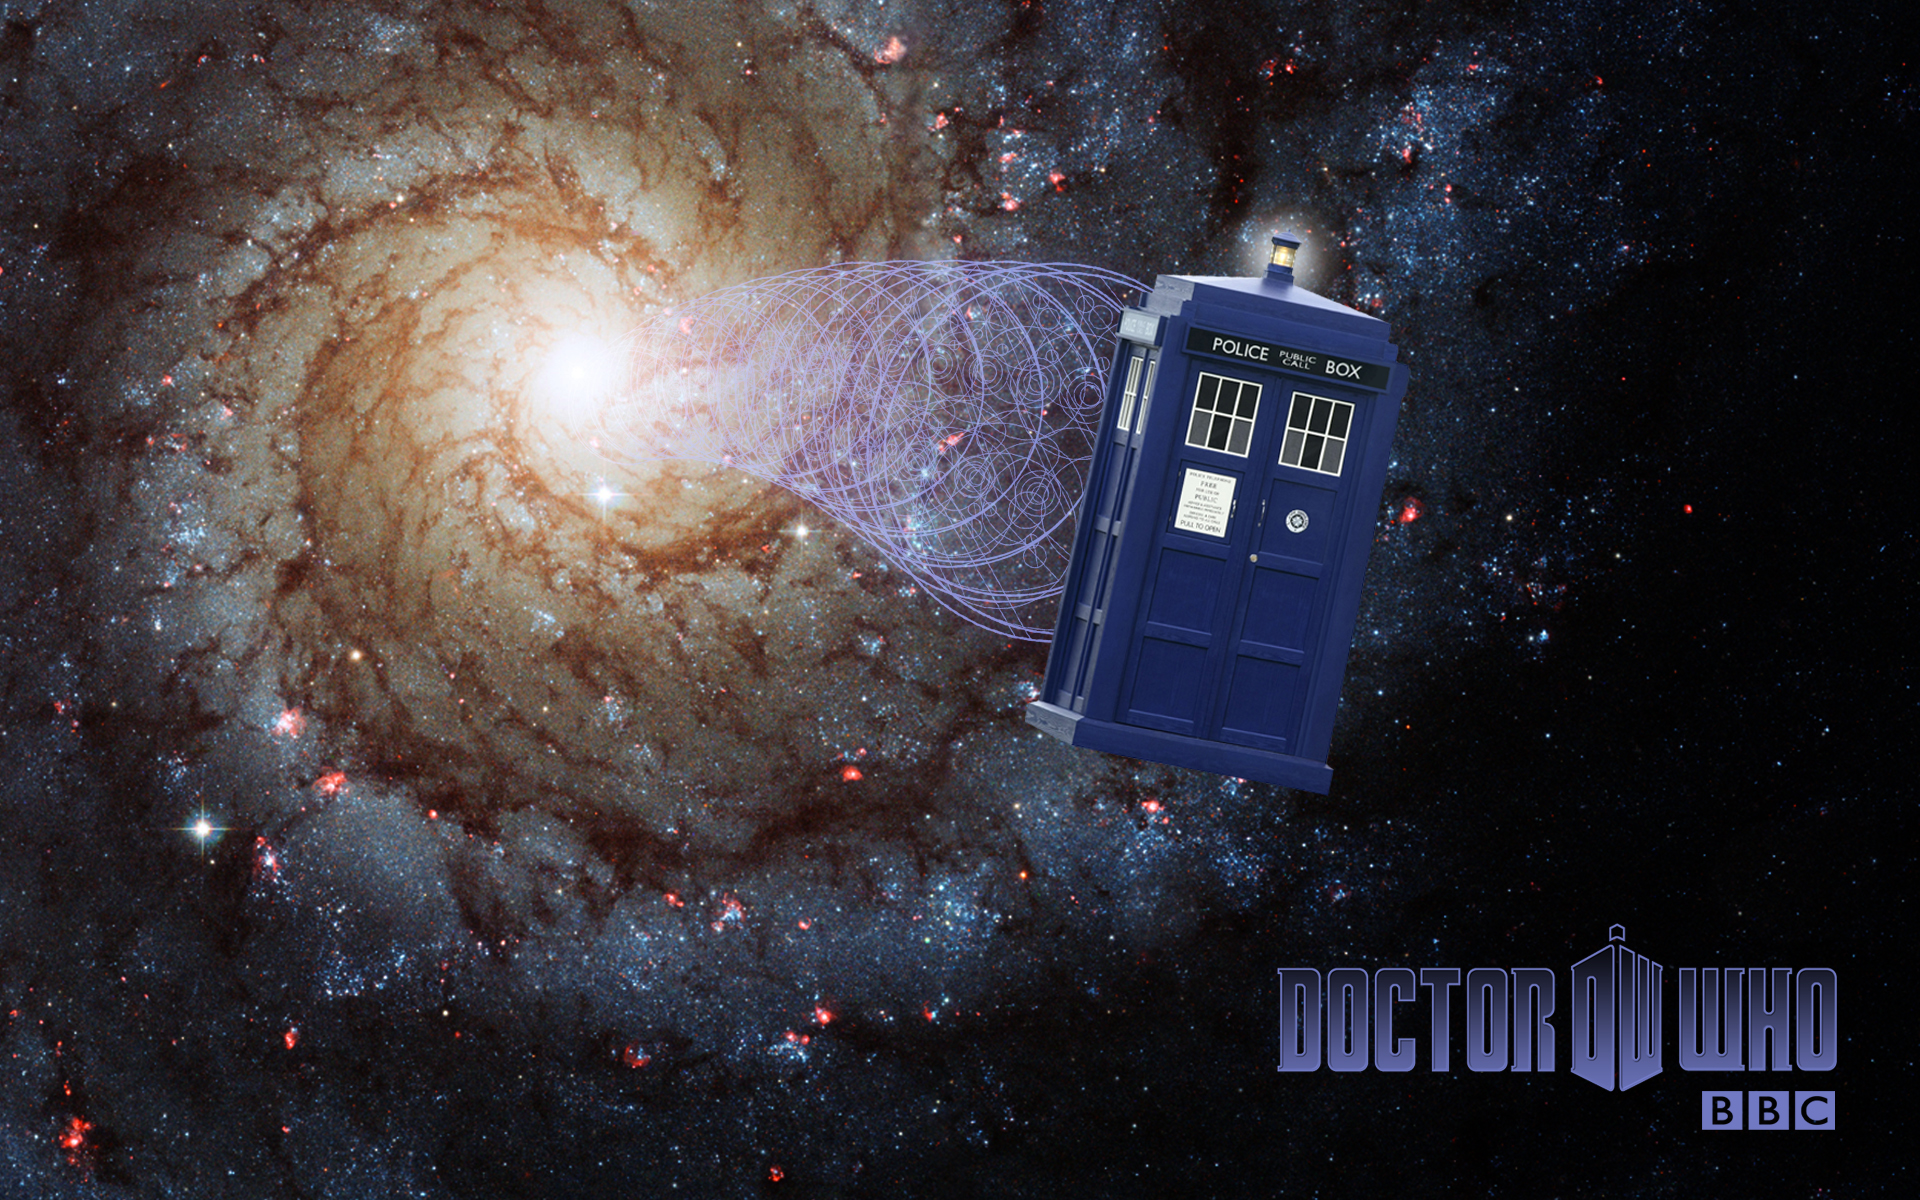 Download Doctor Who Wallpapers Tardis pictures in high definition or